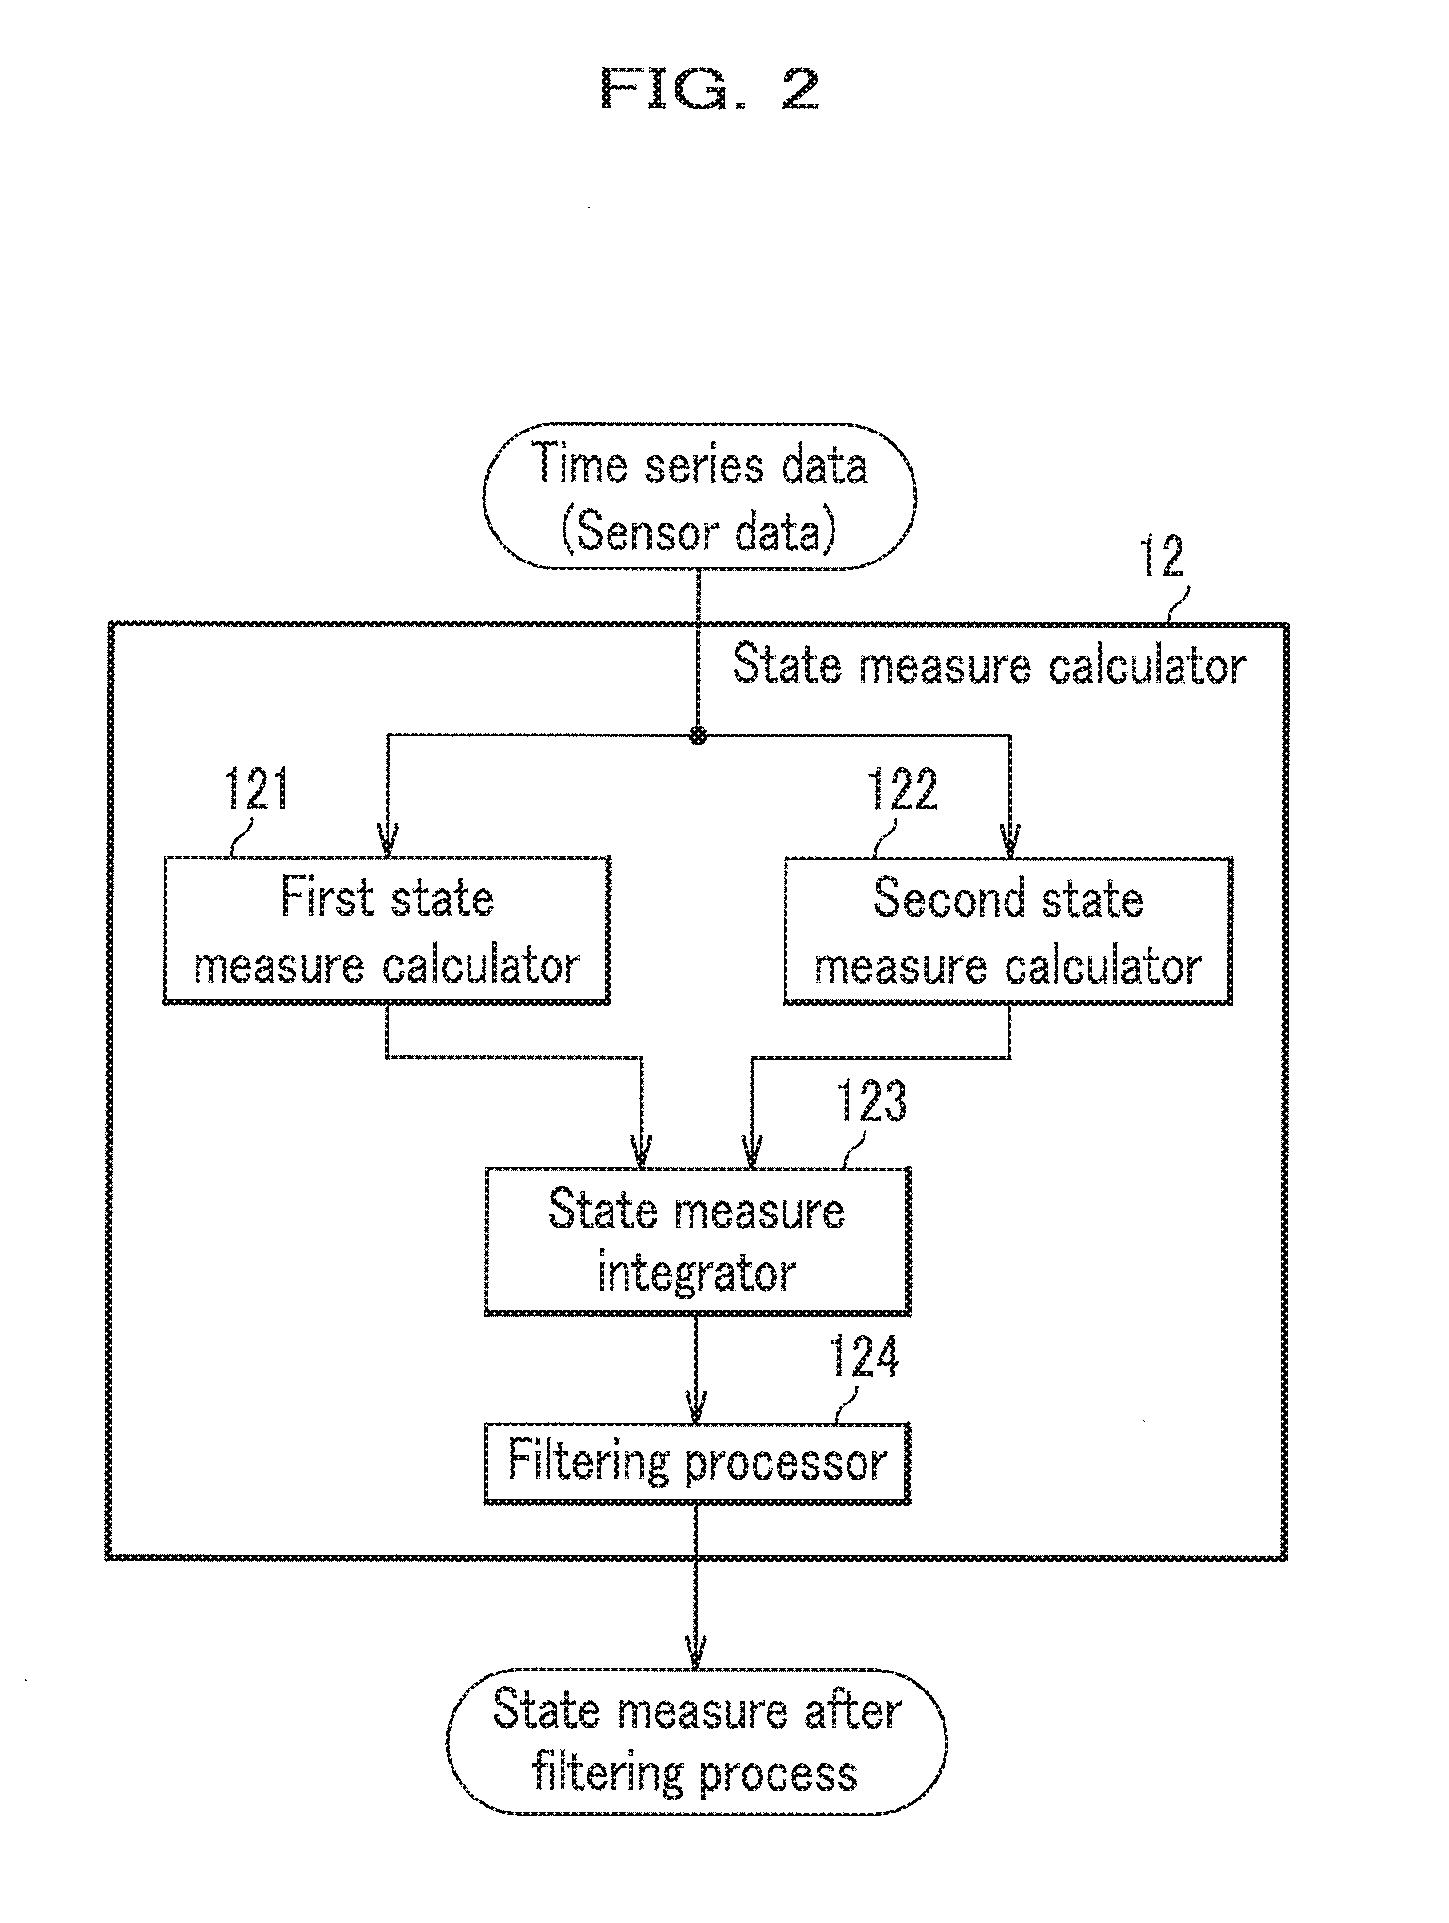 Anomaly Diagnosis System and Anomaly Diagnosis Method